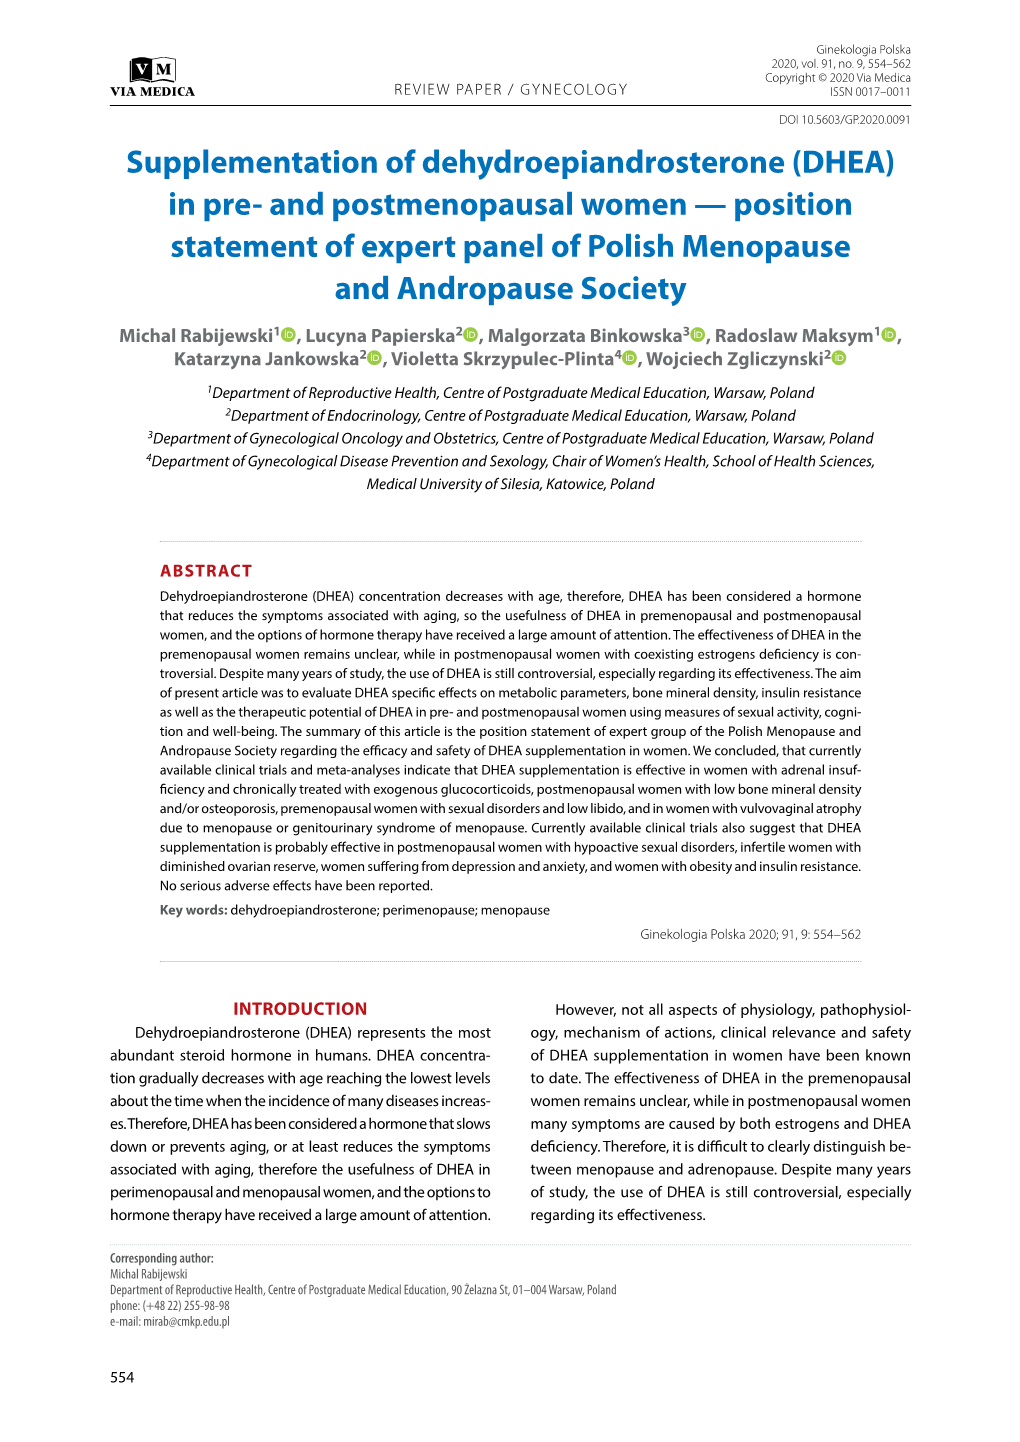 And Postmenopausal Women — Position Statement of Expert Panel of Polish Menopause and Andropause Society